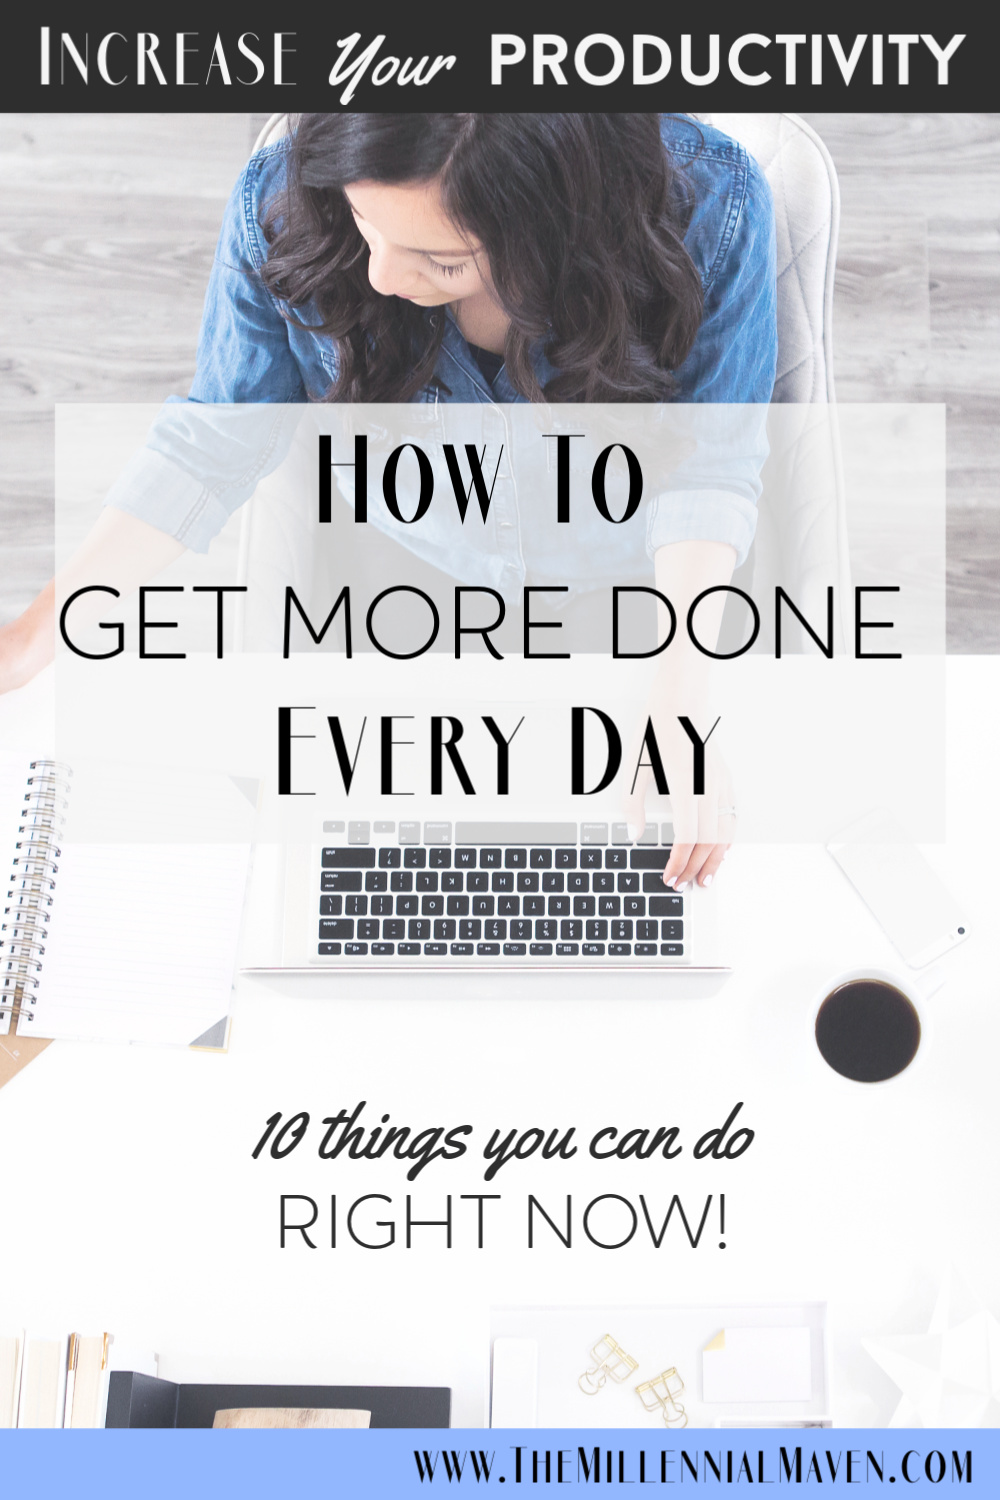 How To Get More Done Every Day || Increase Productivity || The Millennial Maven #productivity #beproductive #getmoredone #productivityhacks #domore